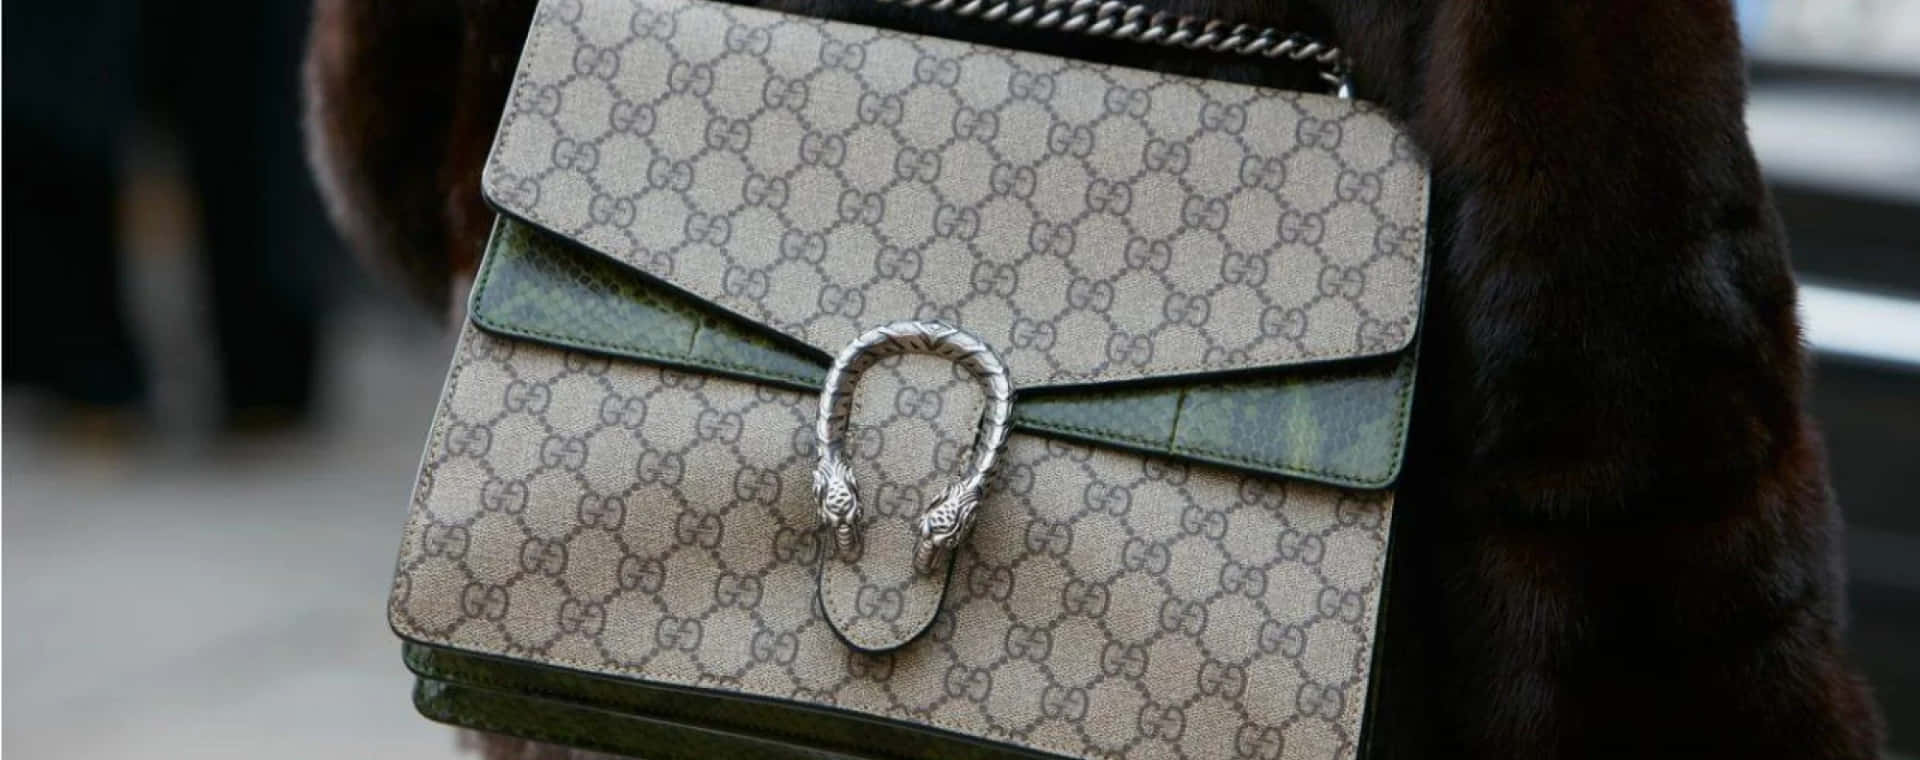 Elevate your everyday style with this Louis Vuitton Eva Clutch